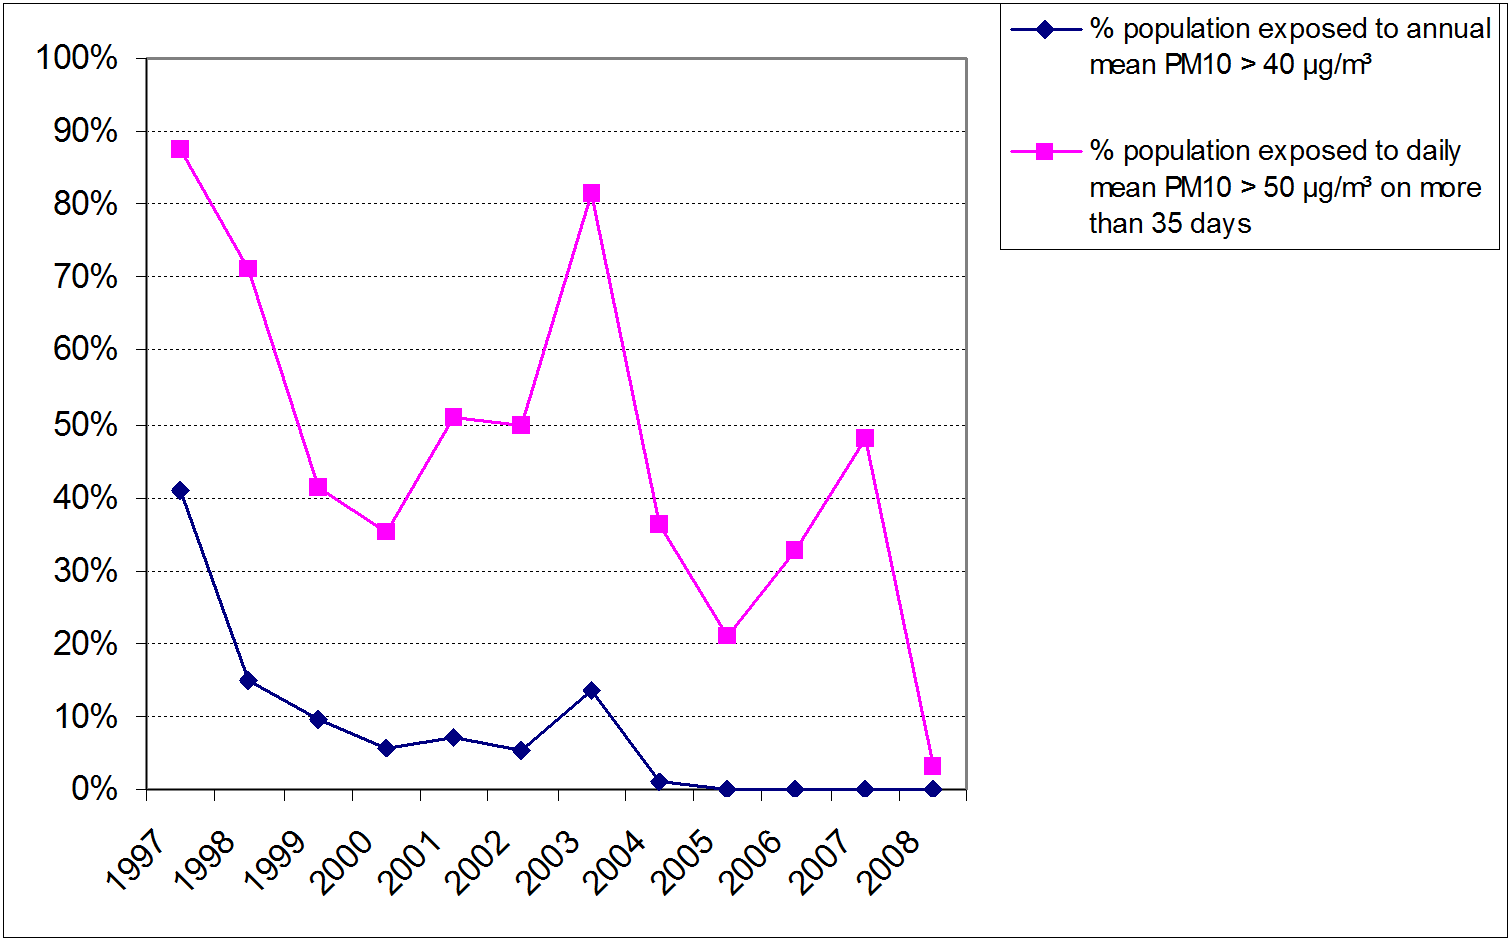 Figure 2: Percentage of the Belgian population potentially exposed to PM10 concentrations